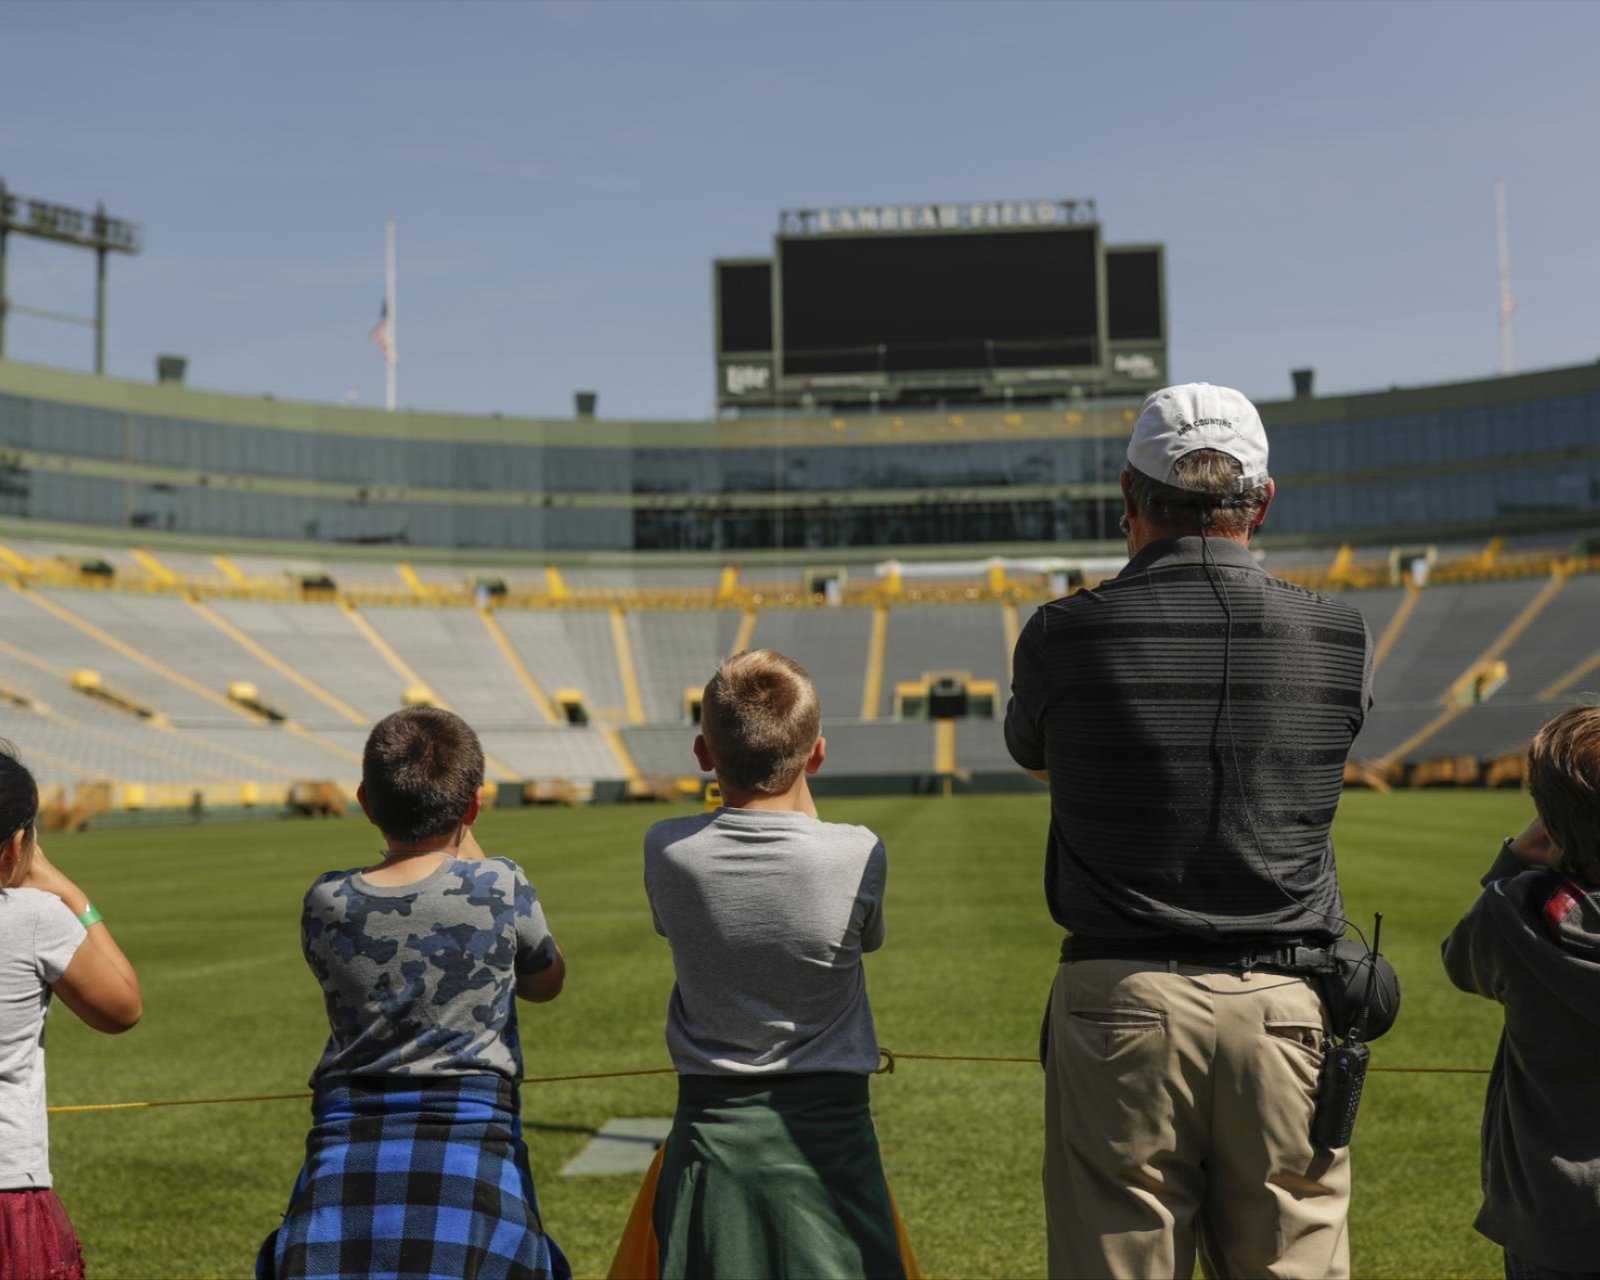 Stadium Viewings and Packers Hall of Fame now open